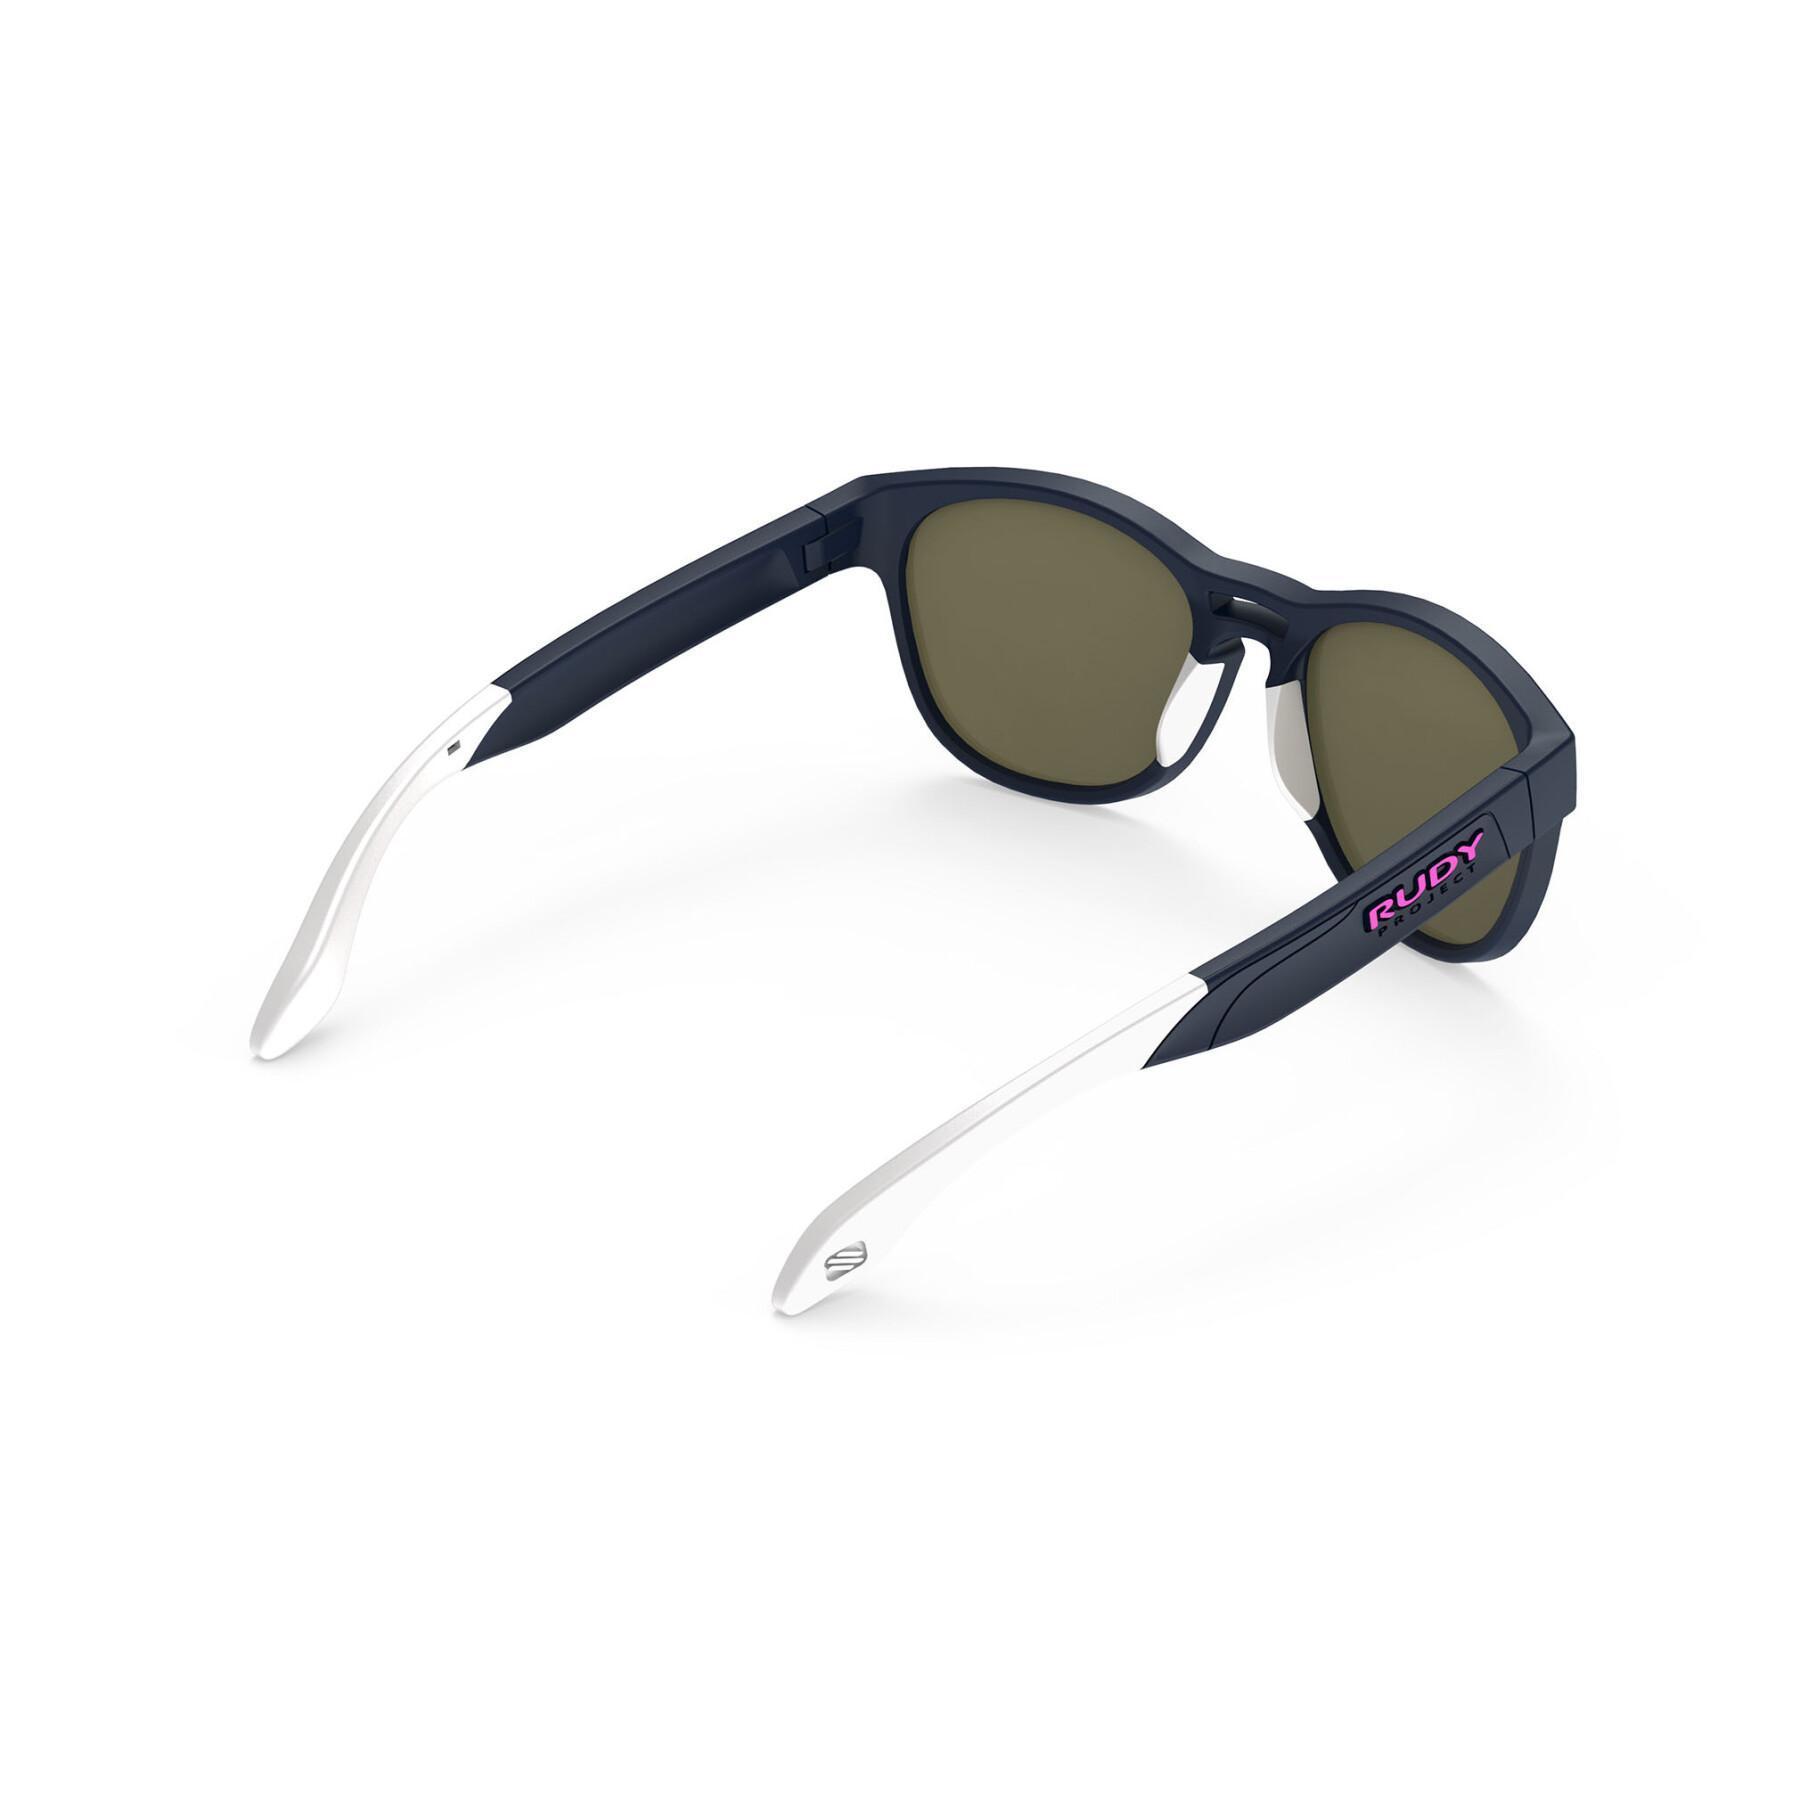 Sunglasses Rudy Project spinair 56